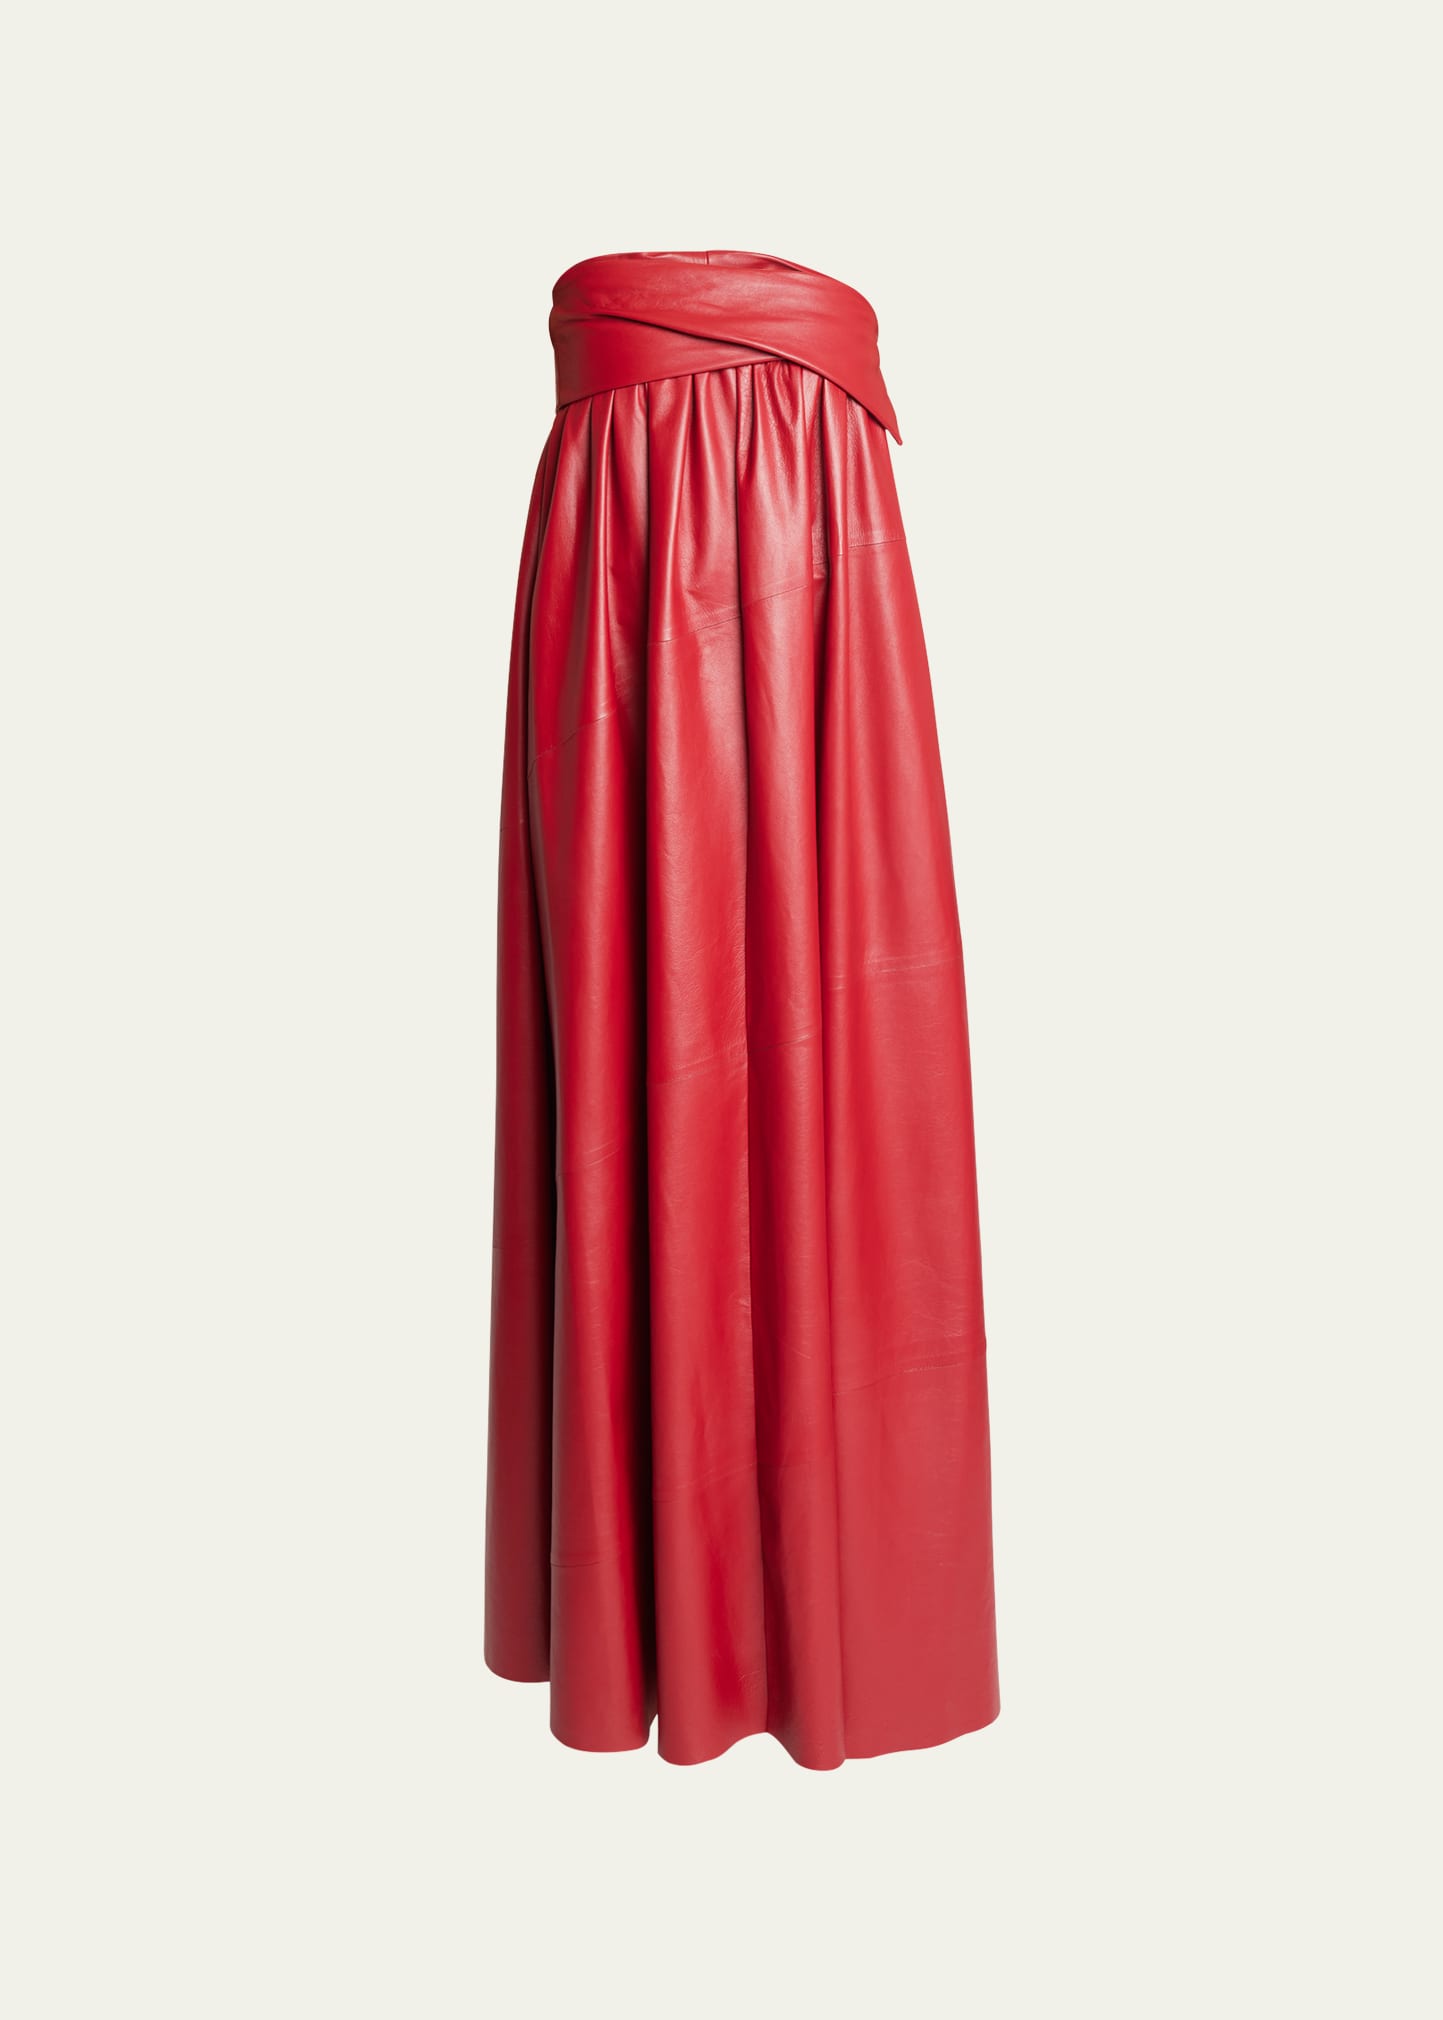 PROENZA SCHOULER NAPPA LEATHER EMPIRE-WAIST STRAPLESS GOWN